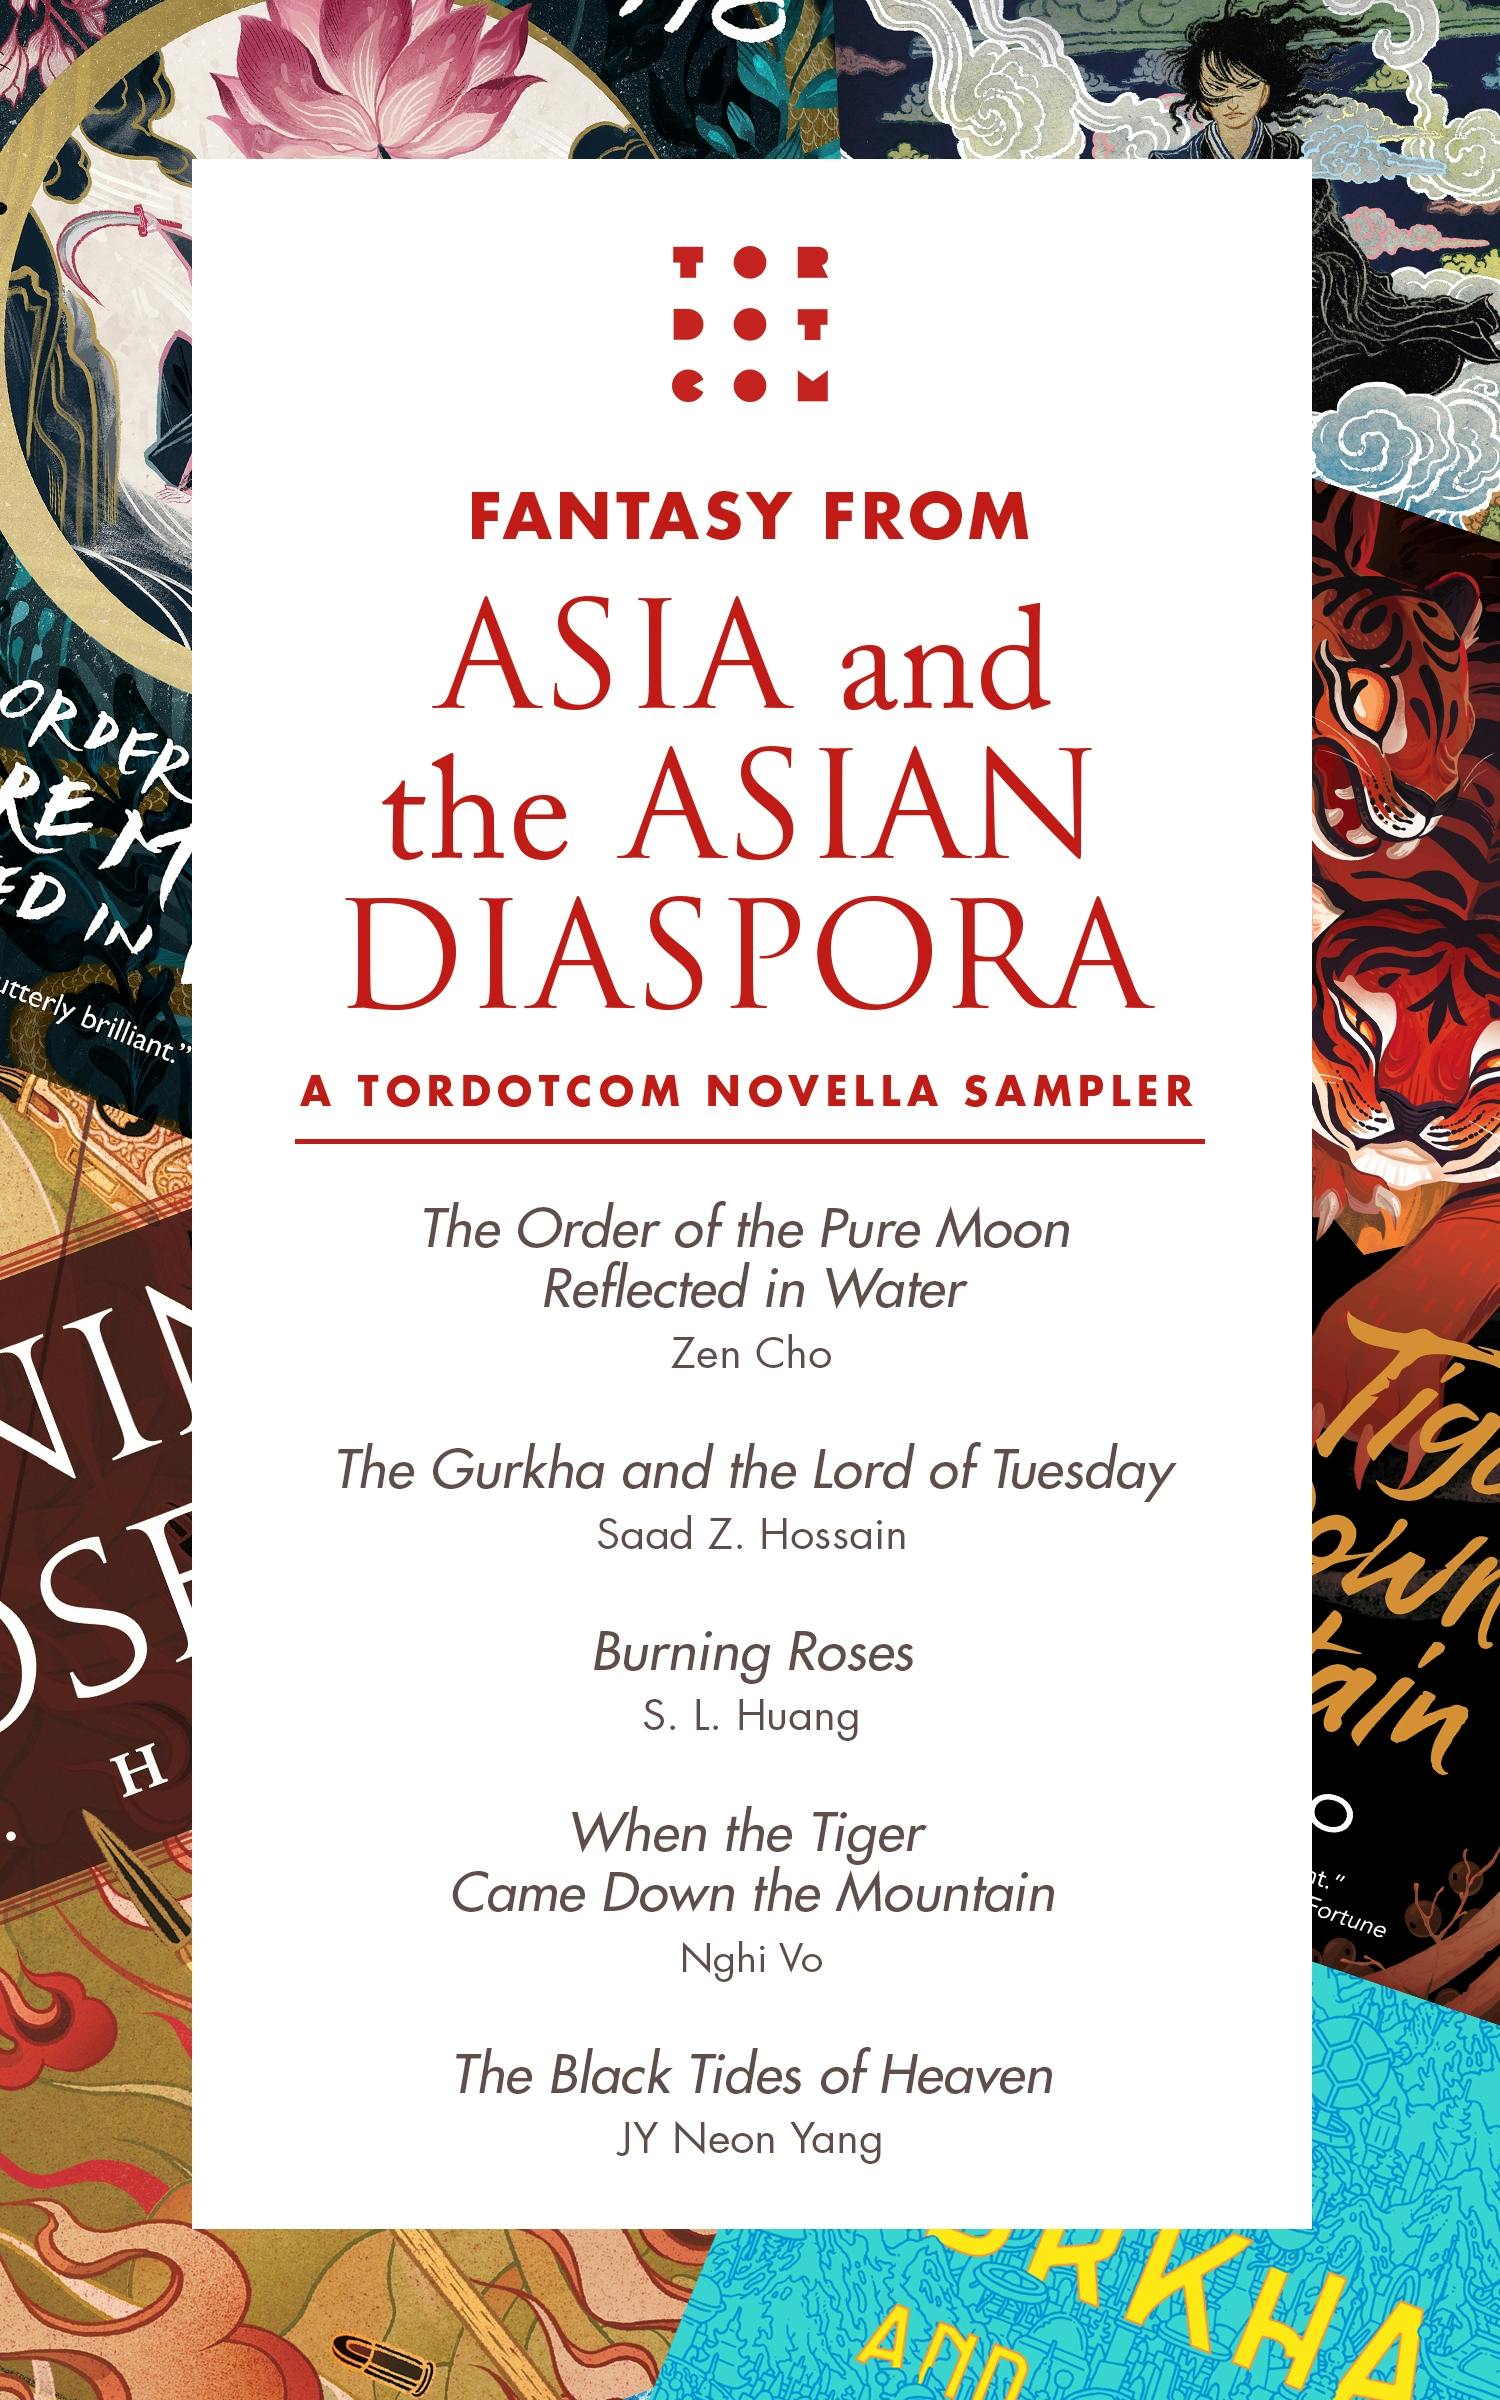 Cover for the book titled as: Fantasy from Asia and the Asian Diaspora